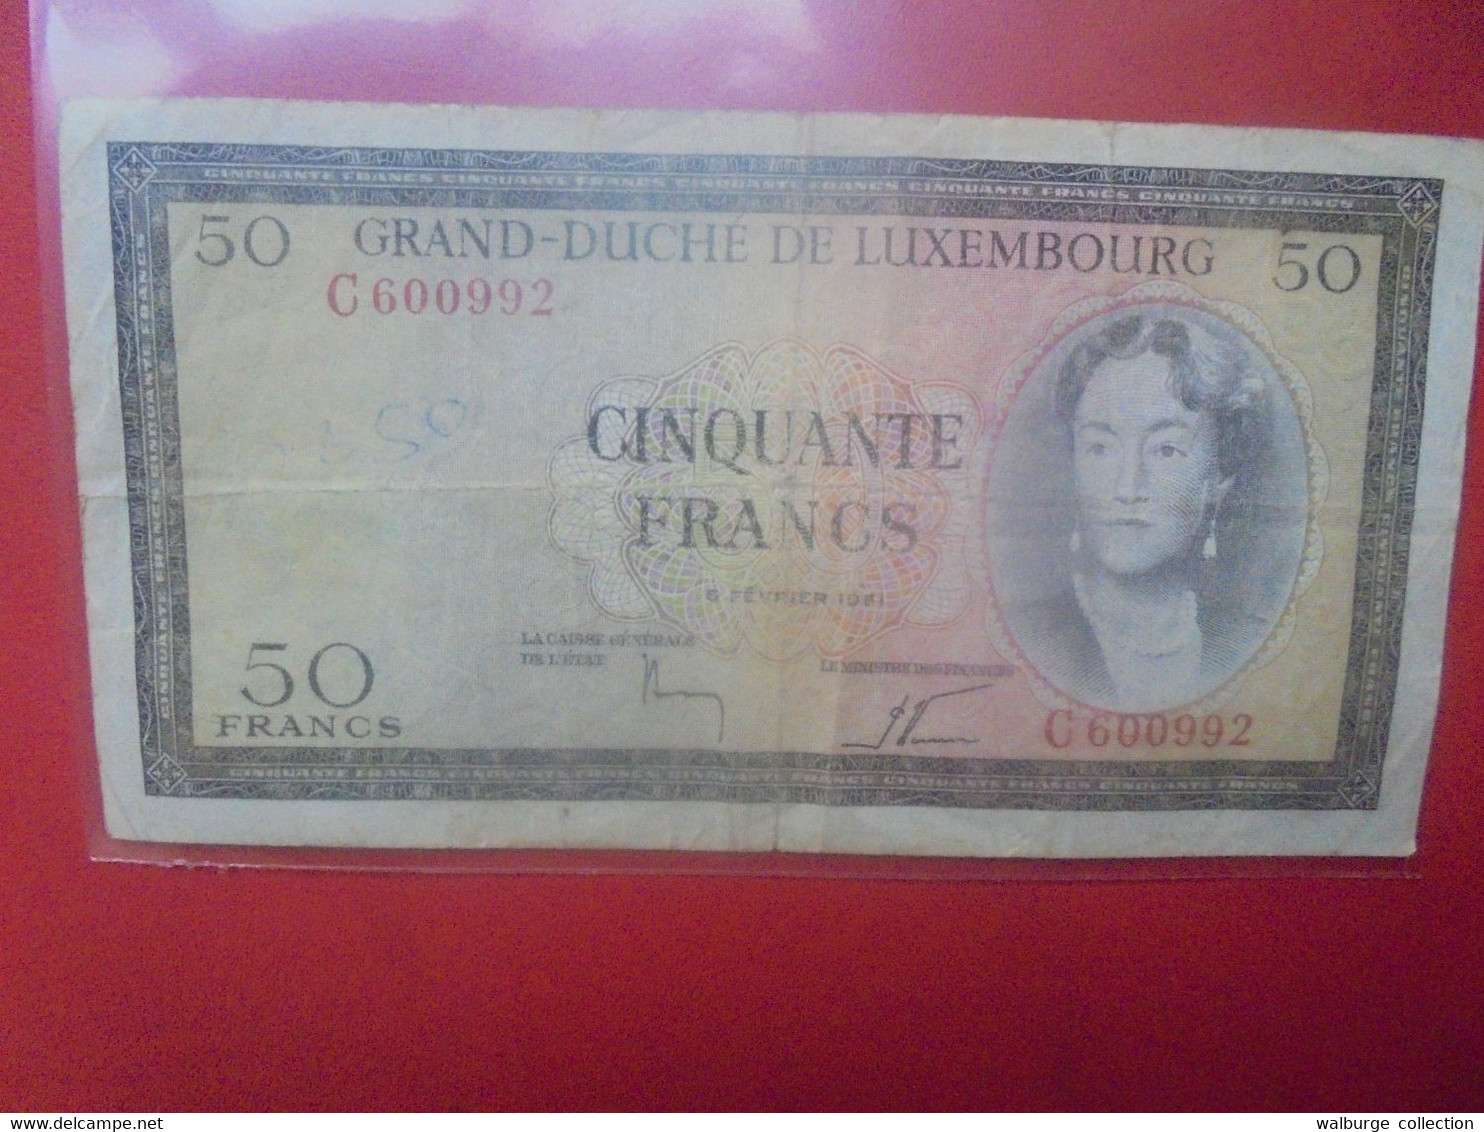 LUXEMBOURG 50 Francs 1961 Circuler - Luxembourg